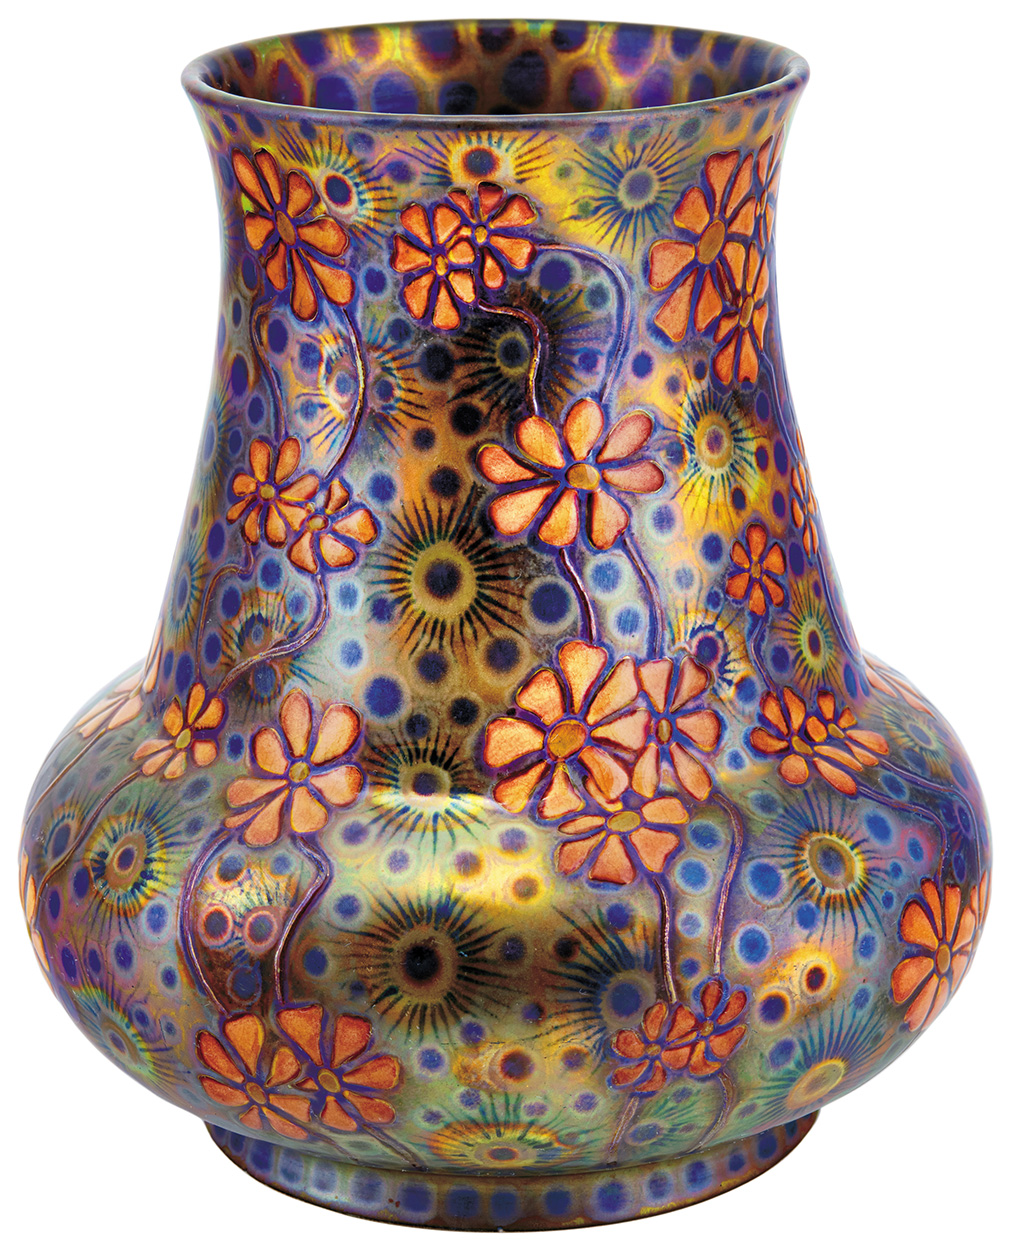 Zsolnay Vase, Decorated with Wild Flowers, Zsolnay, 1902